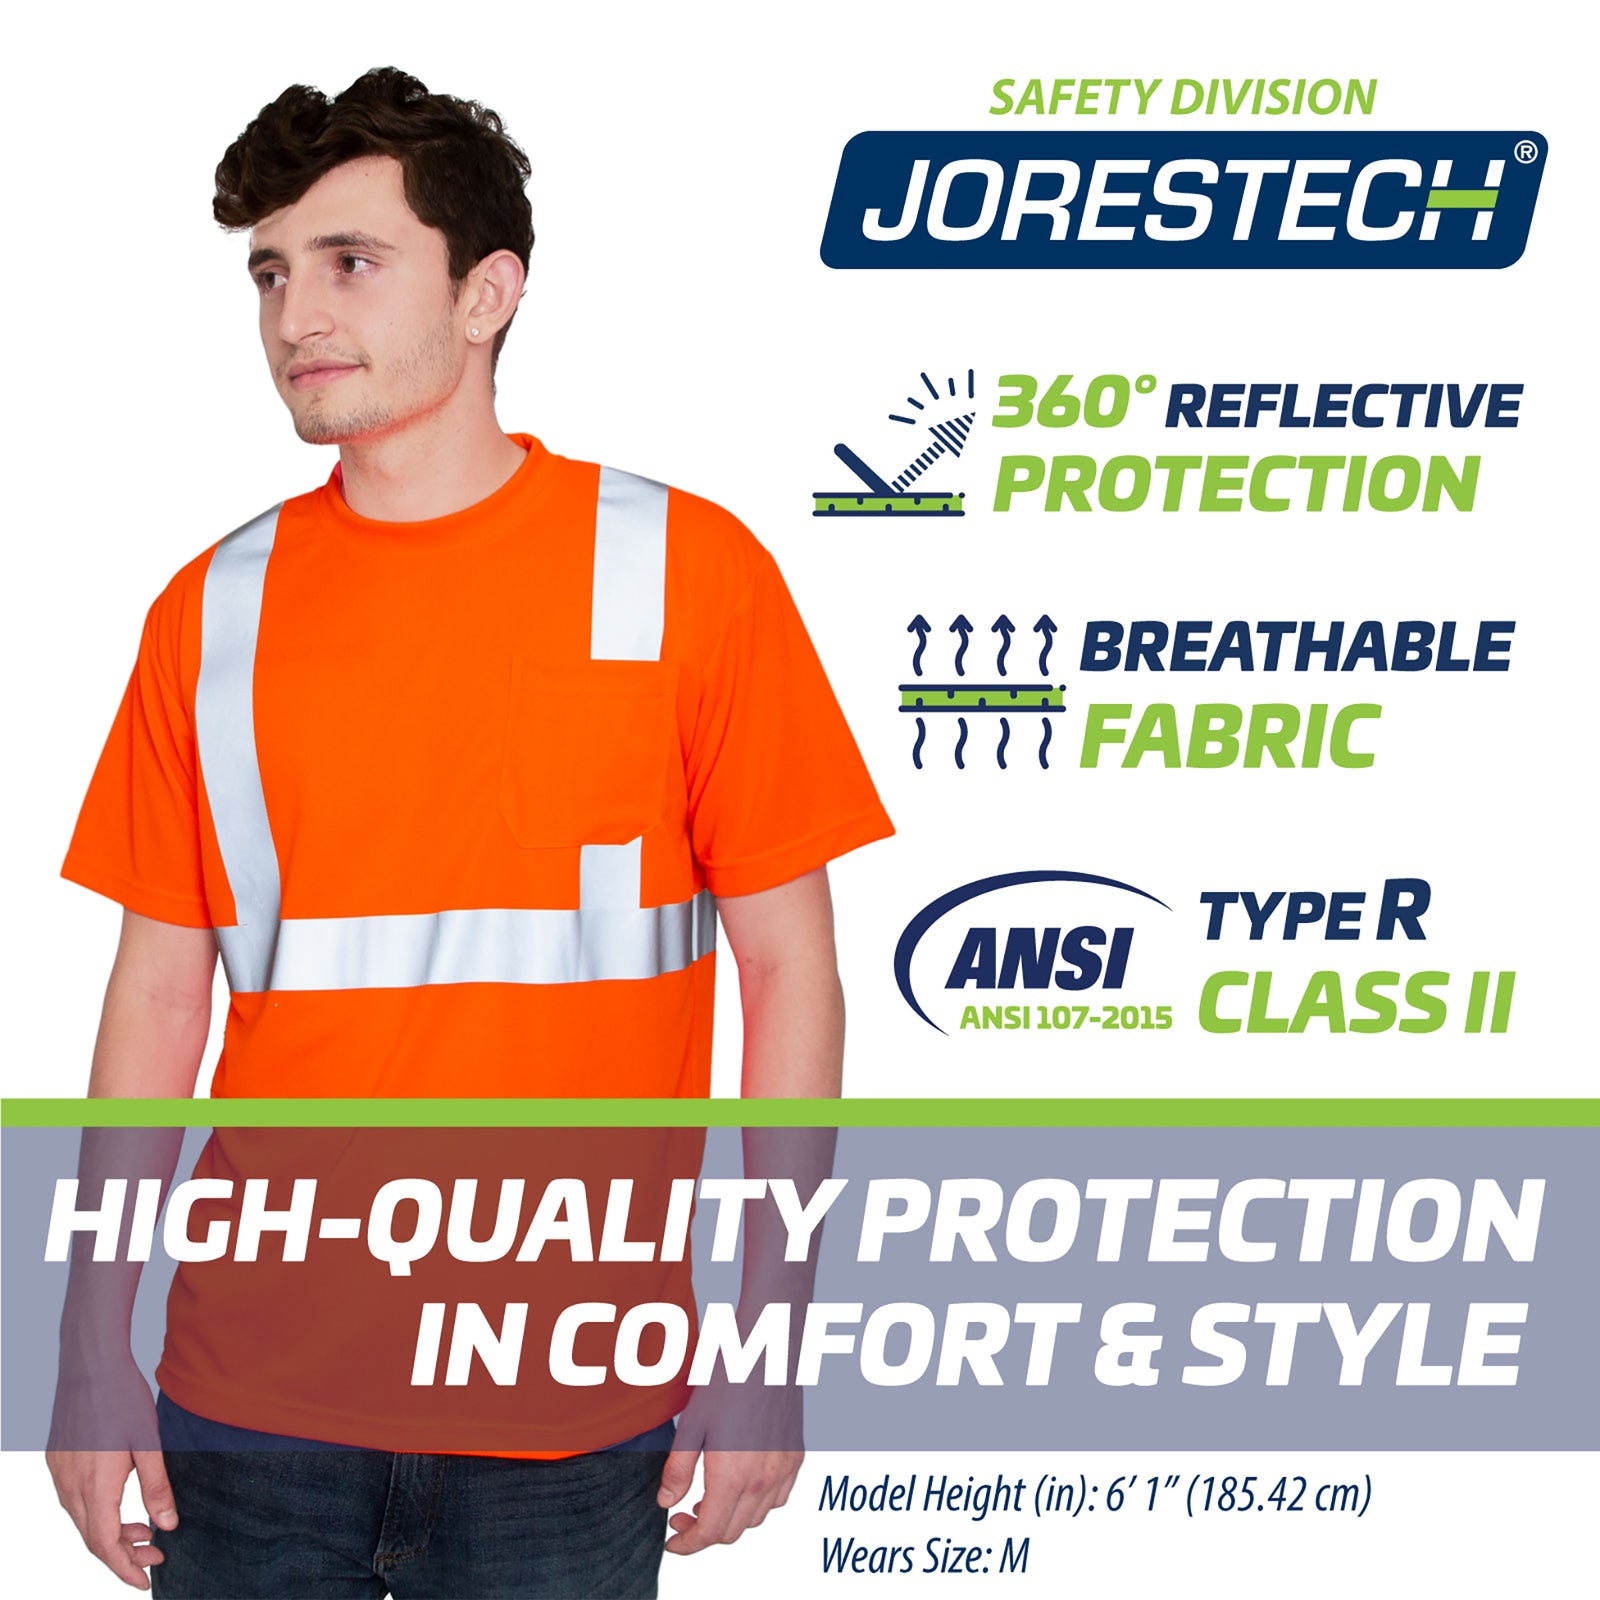 A person wearing the orange hi vis reflective safety pocket JORESTECH shirt and blue and green icons that mention 360 degrees reflective protection, breathable fabric,, ANSI type R class 2 , high quality protection in comfort and style